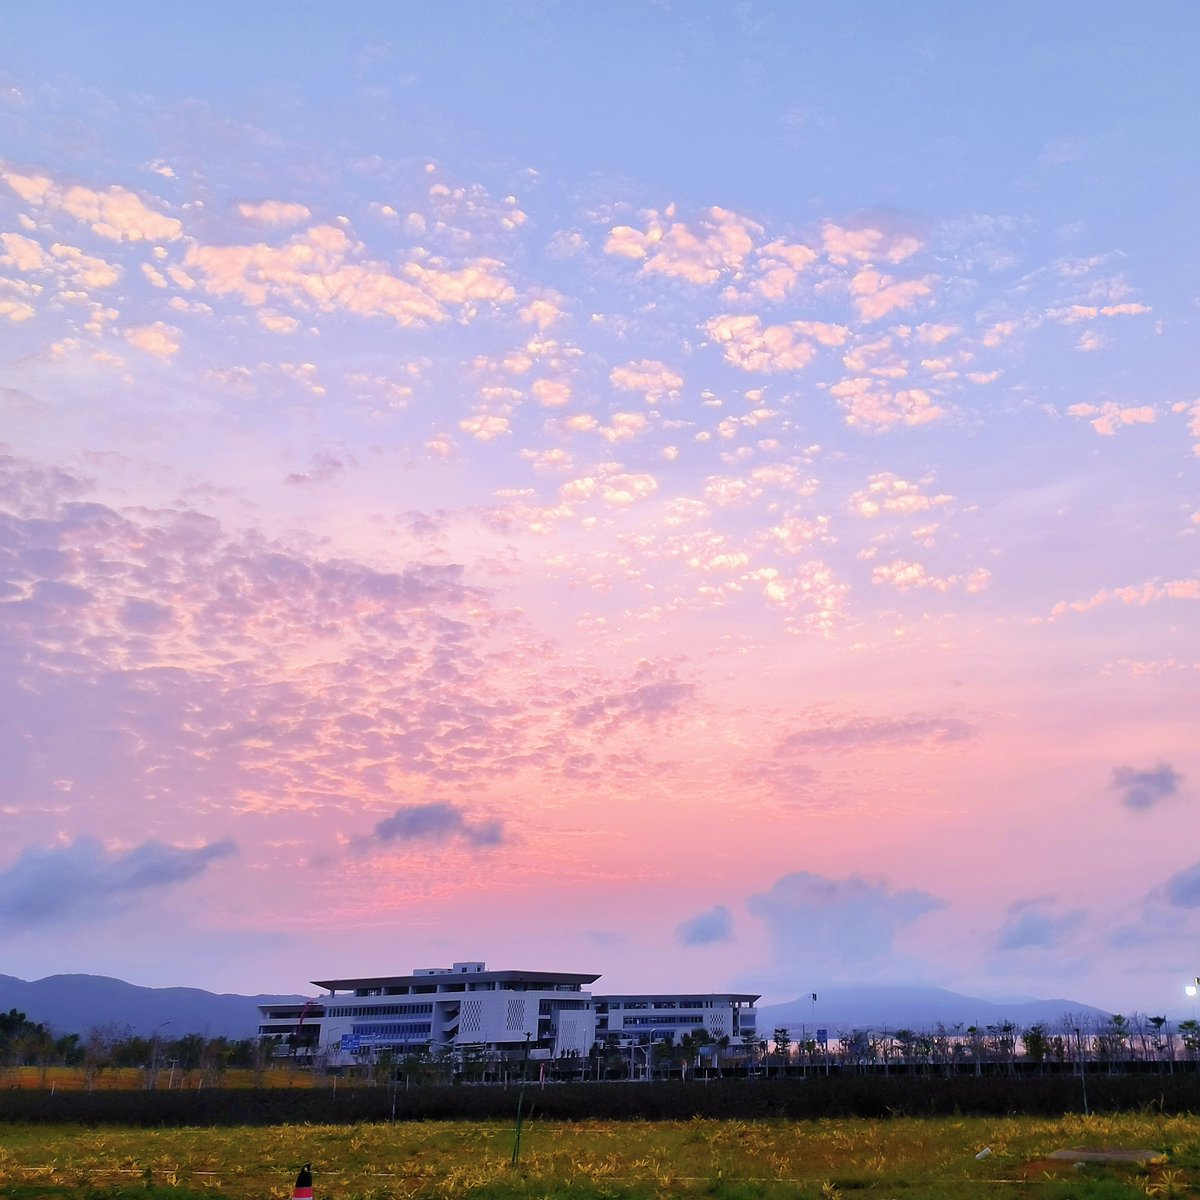 #campusphotography
✨Some fragments of happiness in my campus life.✨

📷by Yuxuan Liu 
#sunset #sunsetview #sunsetglow #nature #views #campus #campuslife #university #universitycampus #myuni #universitylife #schoolphotos #mycampus